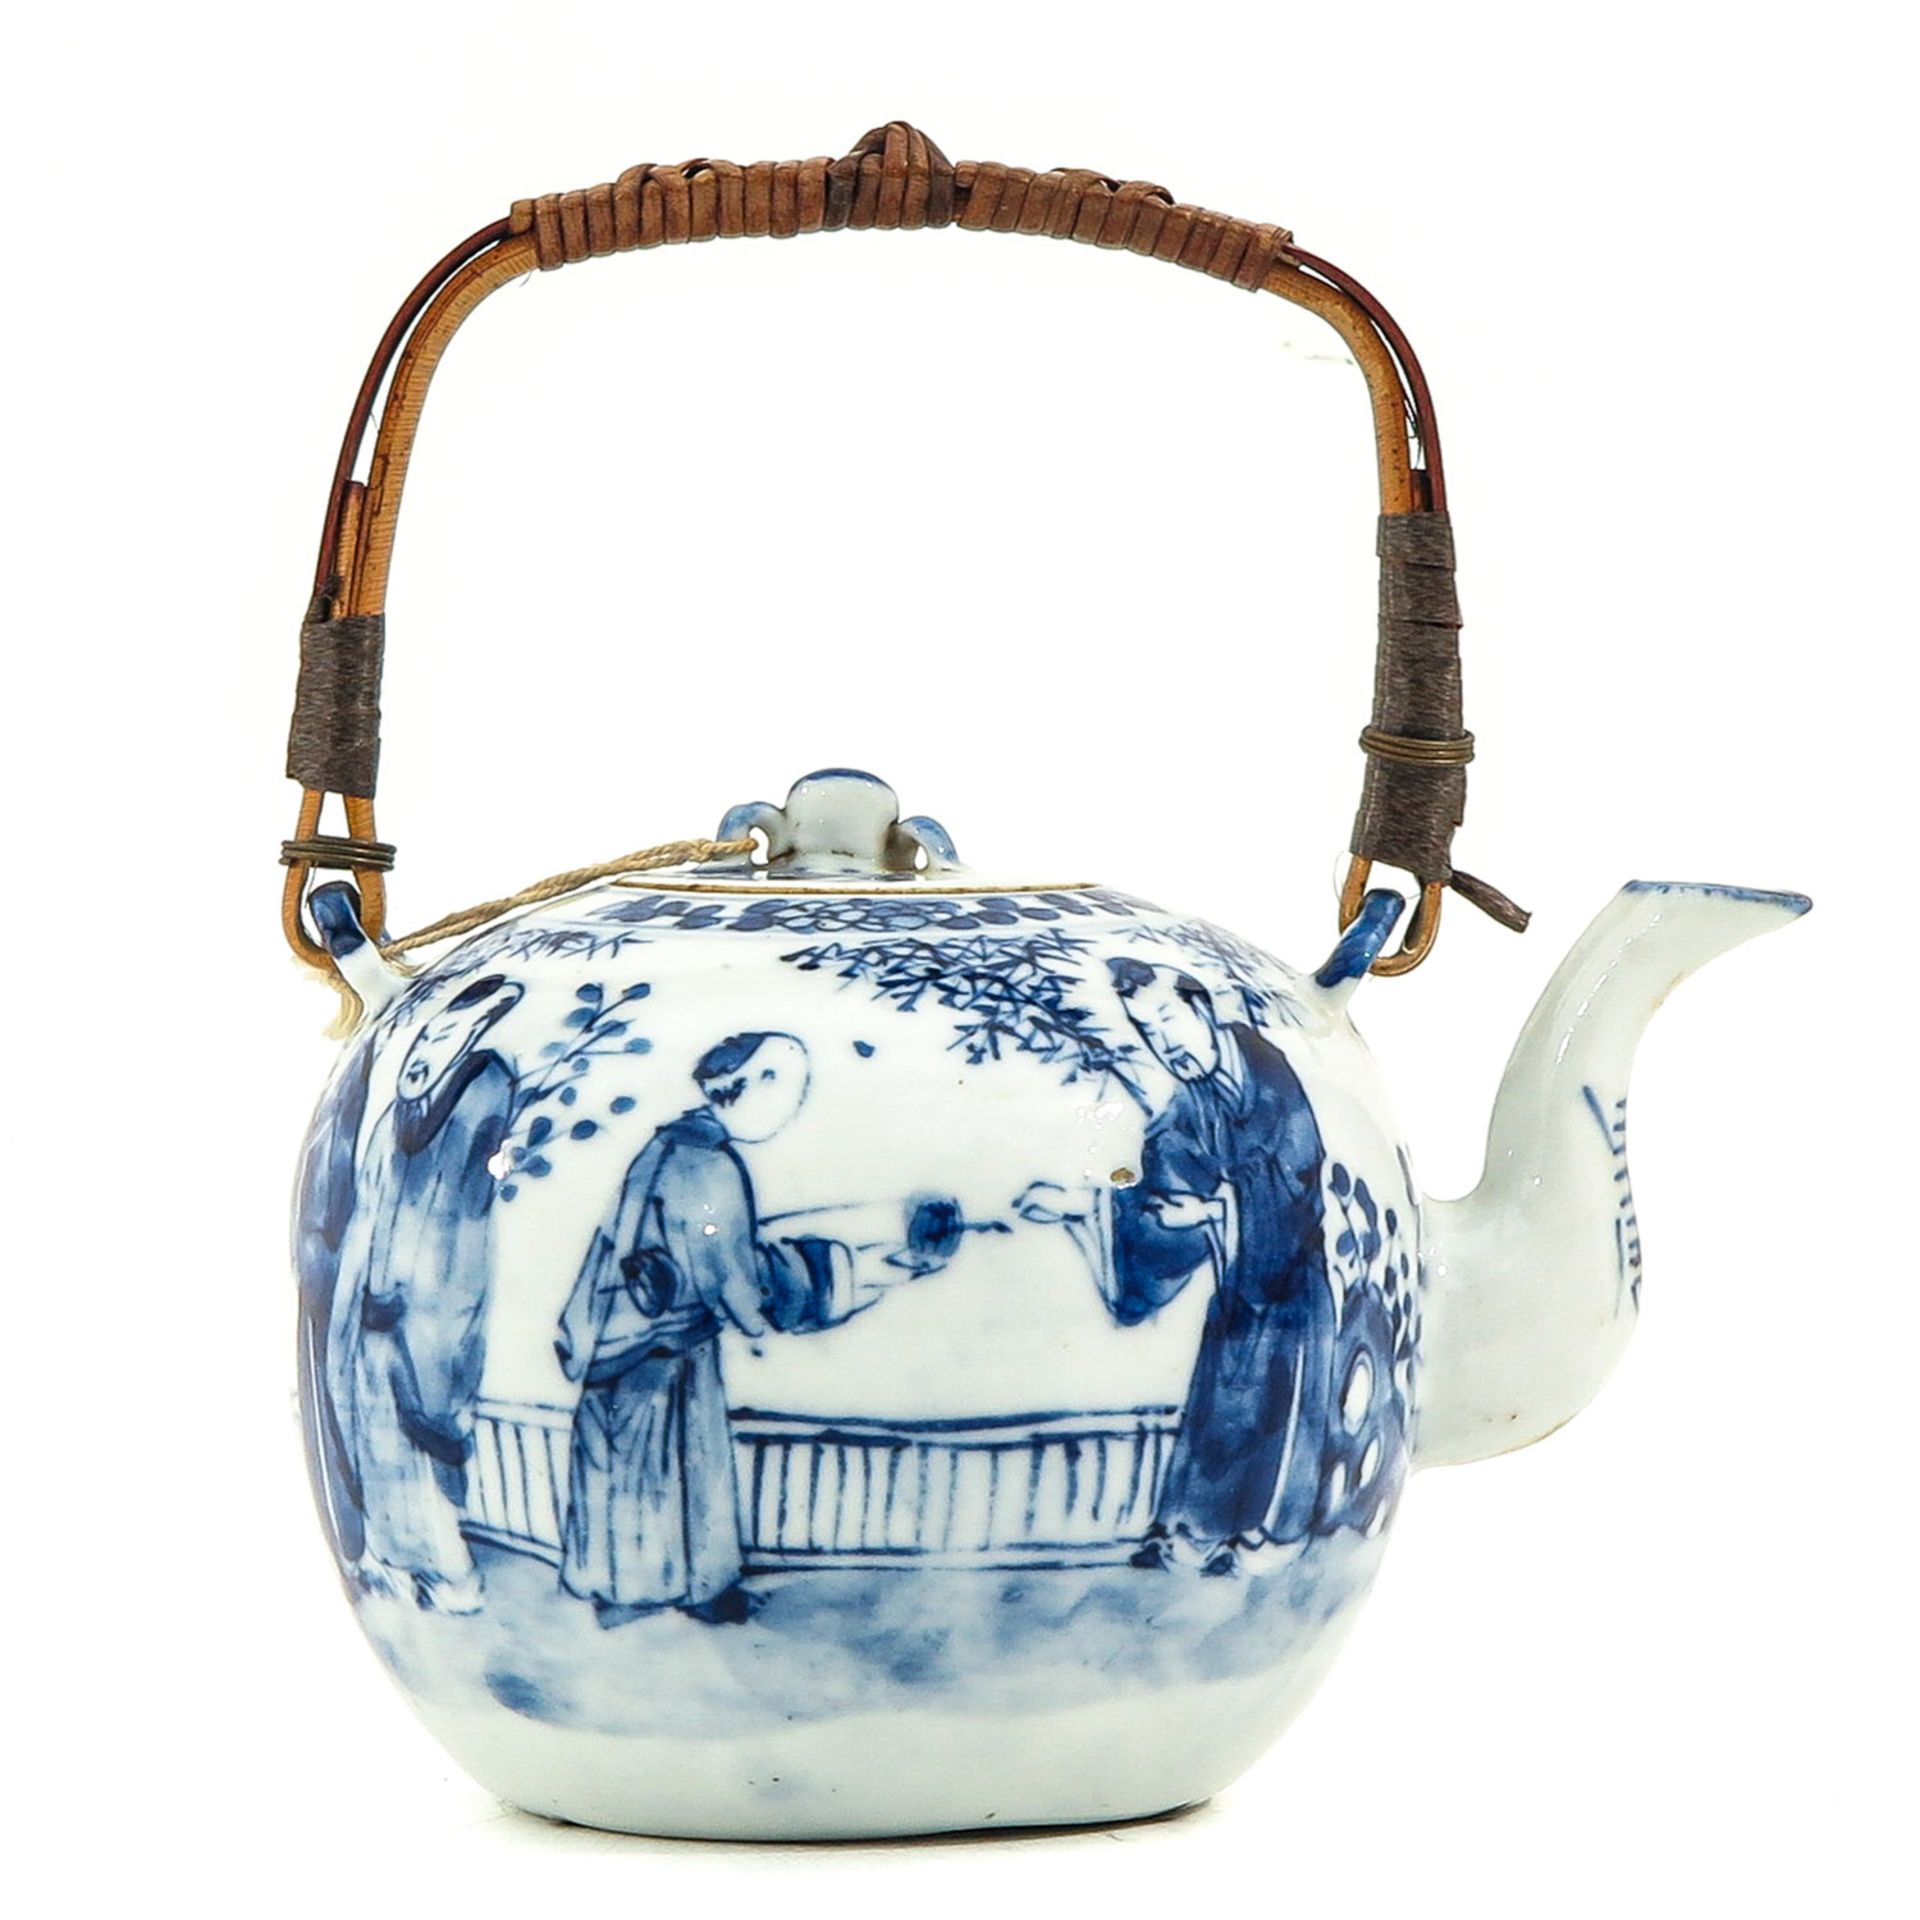 A Blue and White Teapot - Image 3 of 9